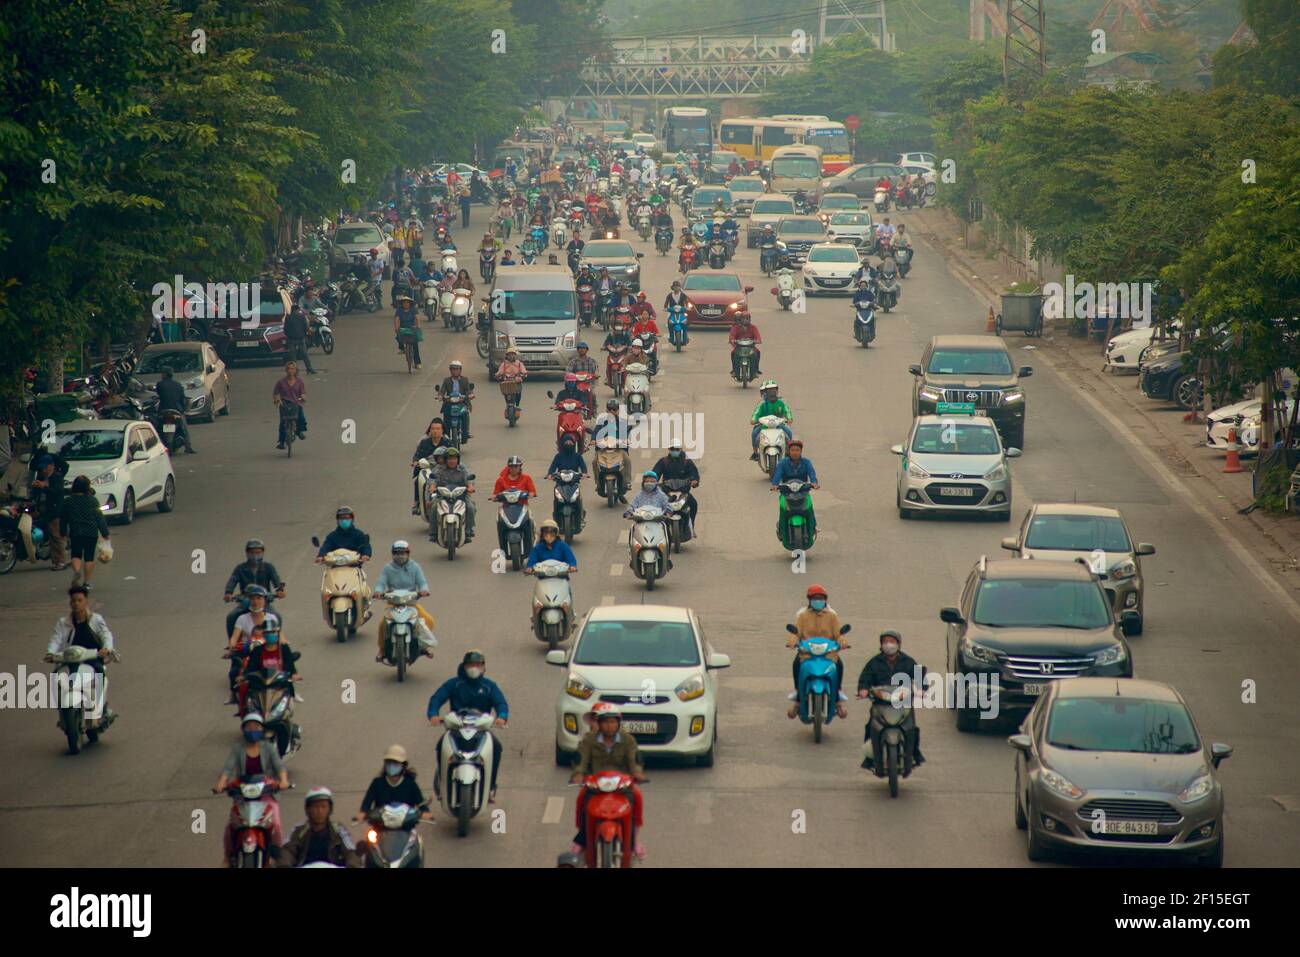 Urban traffic, Hanoi, Vietnam. Busy street with motorcycles, cars and buses. Stock Photo